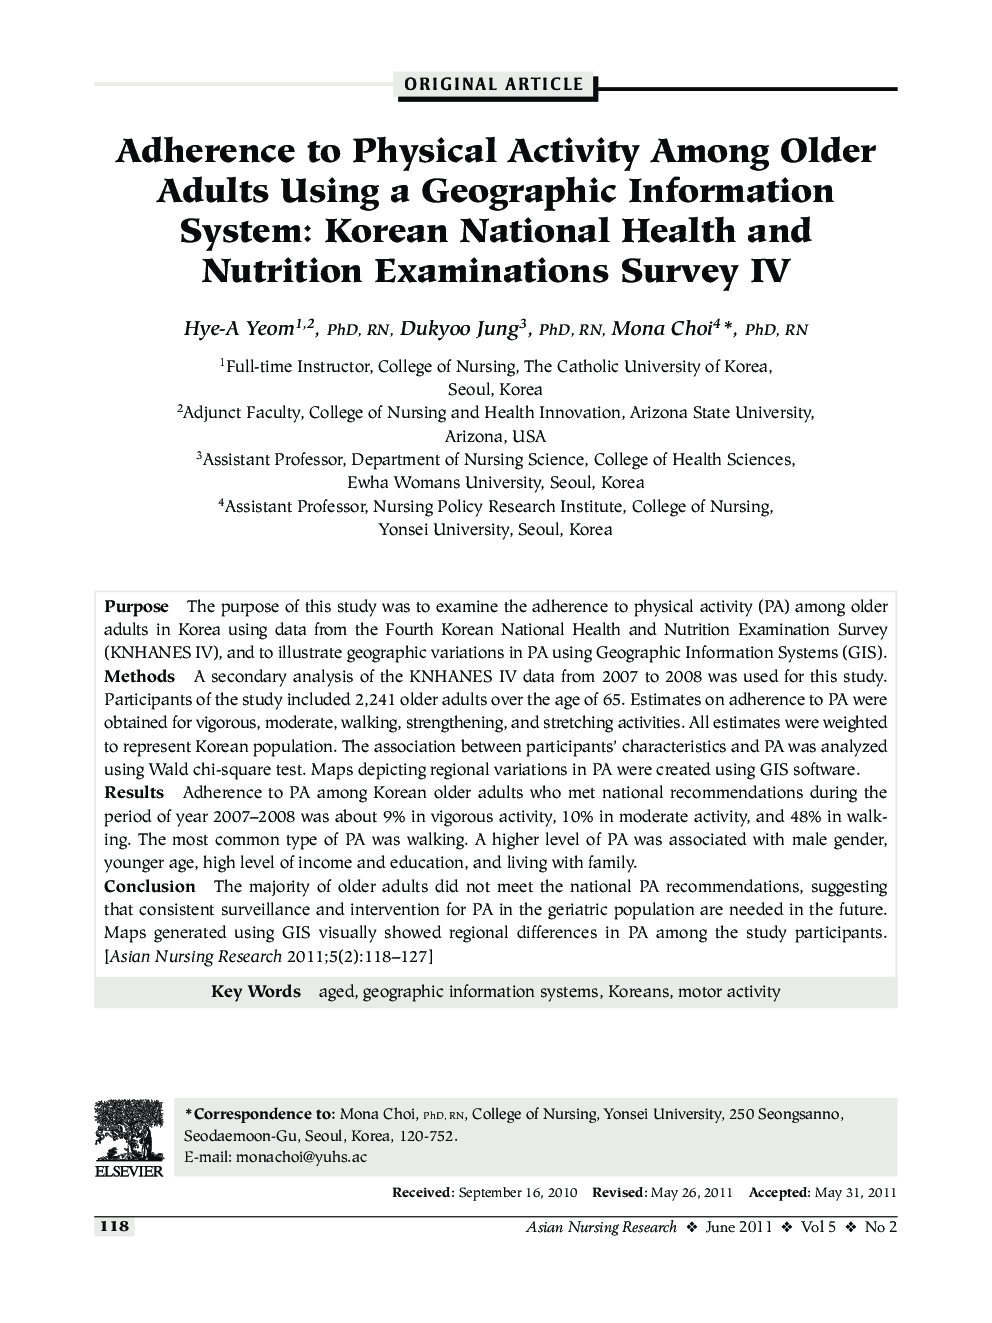 Adherence to Physical Activity Among Older Adults Using a Geographic Information System: Korean National Health and Nutrition Examinations Survey IV